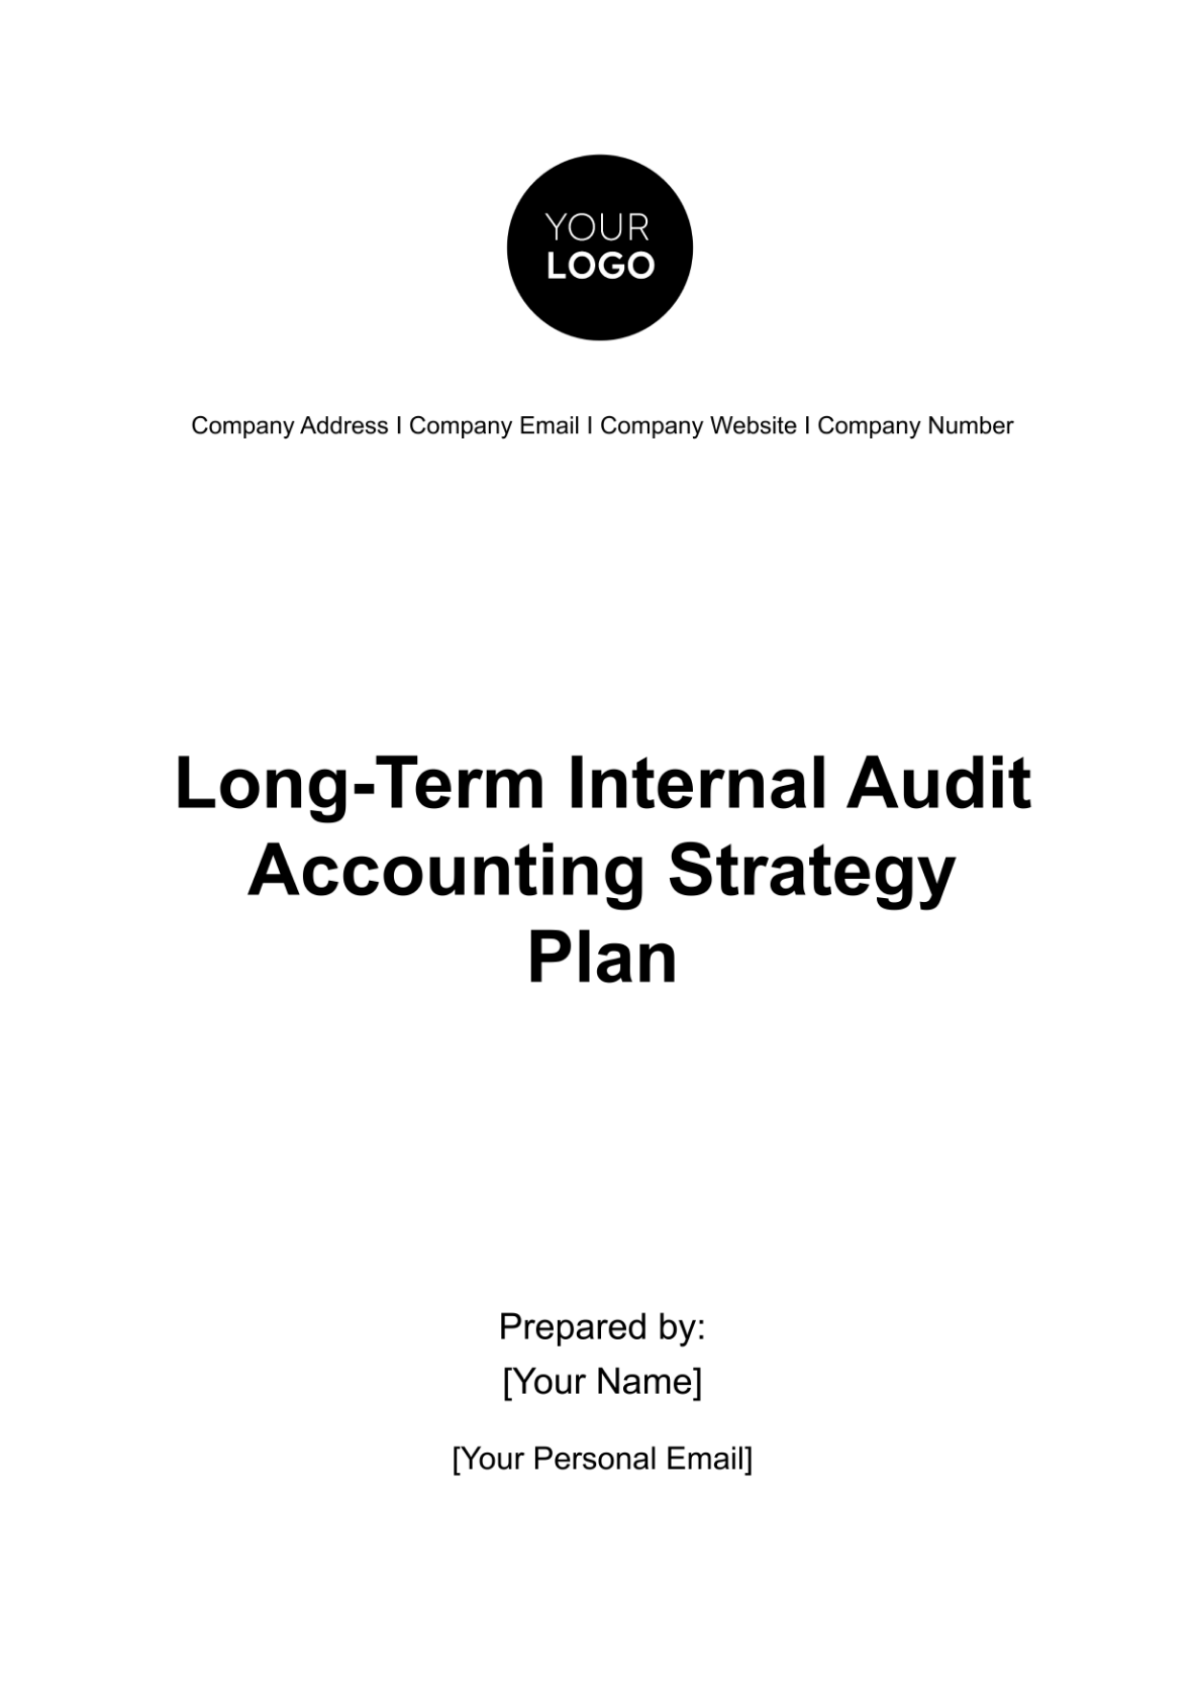 Free Long-Term Internal Audit Accounting Strategy Plan Template